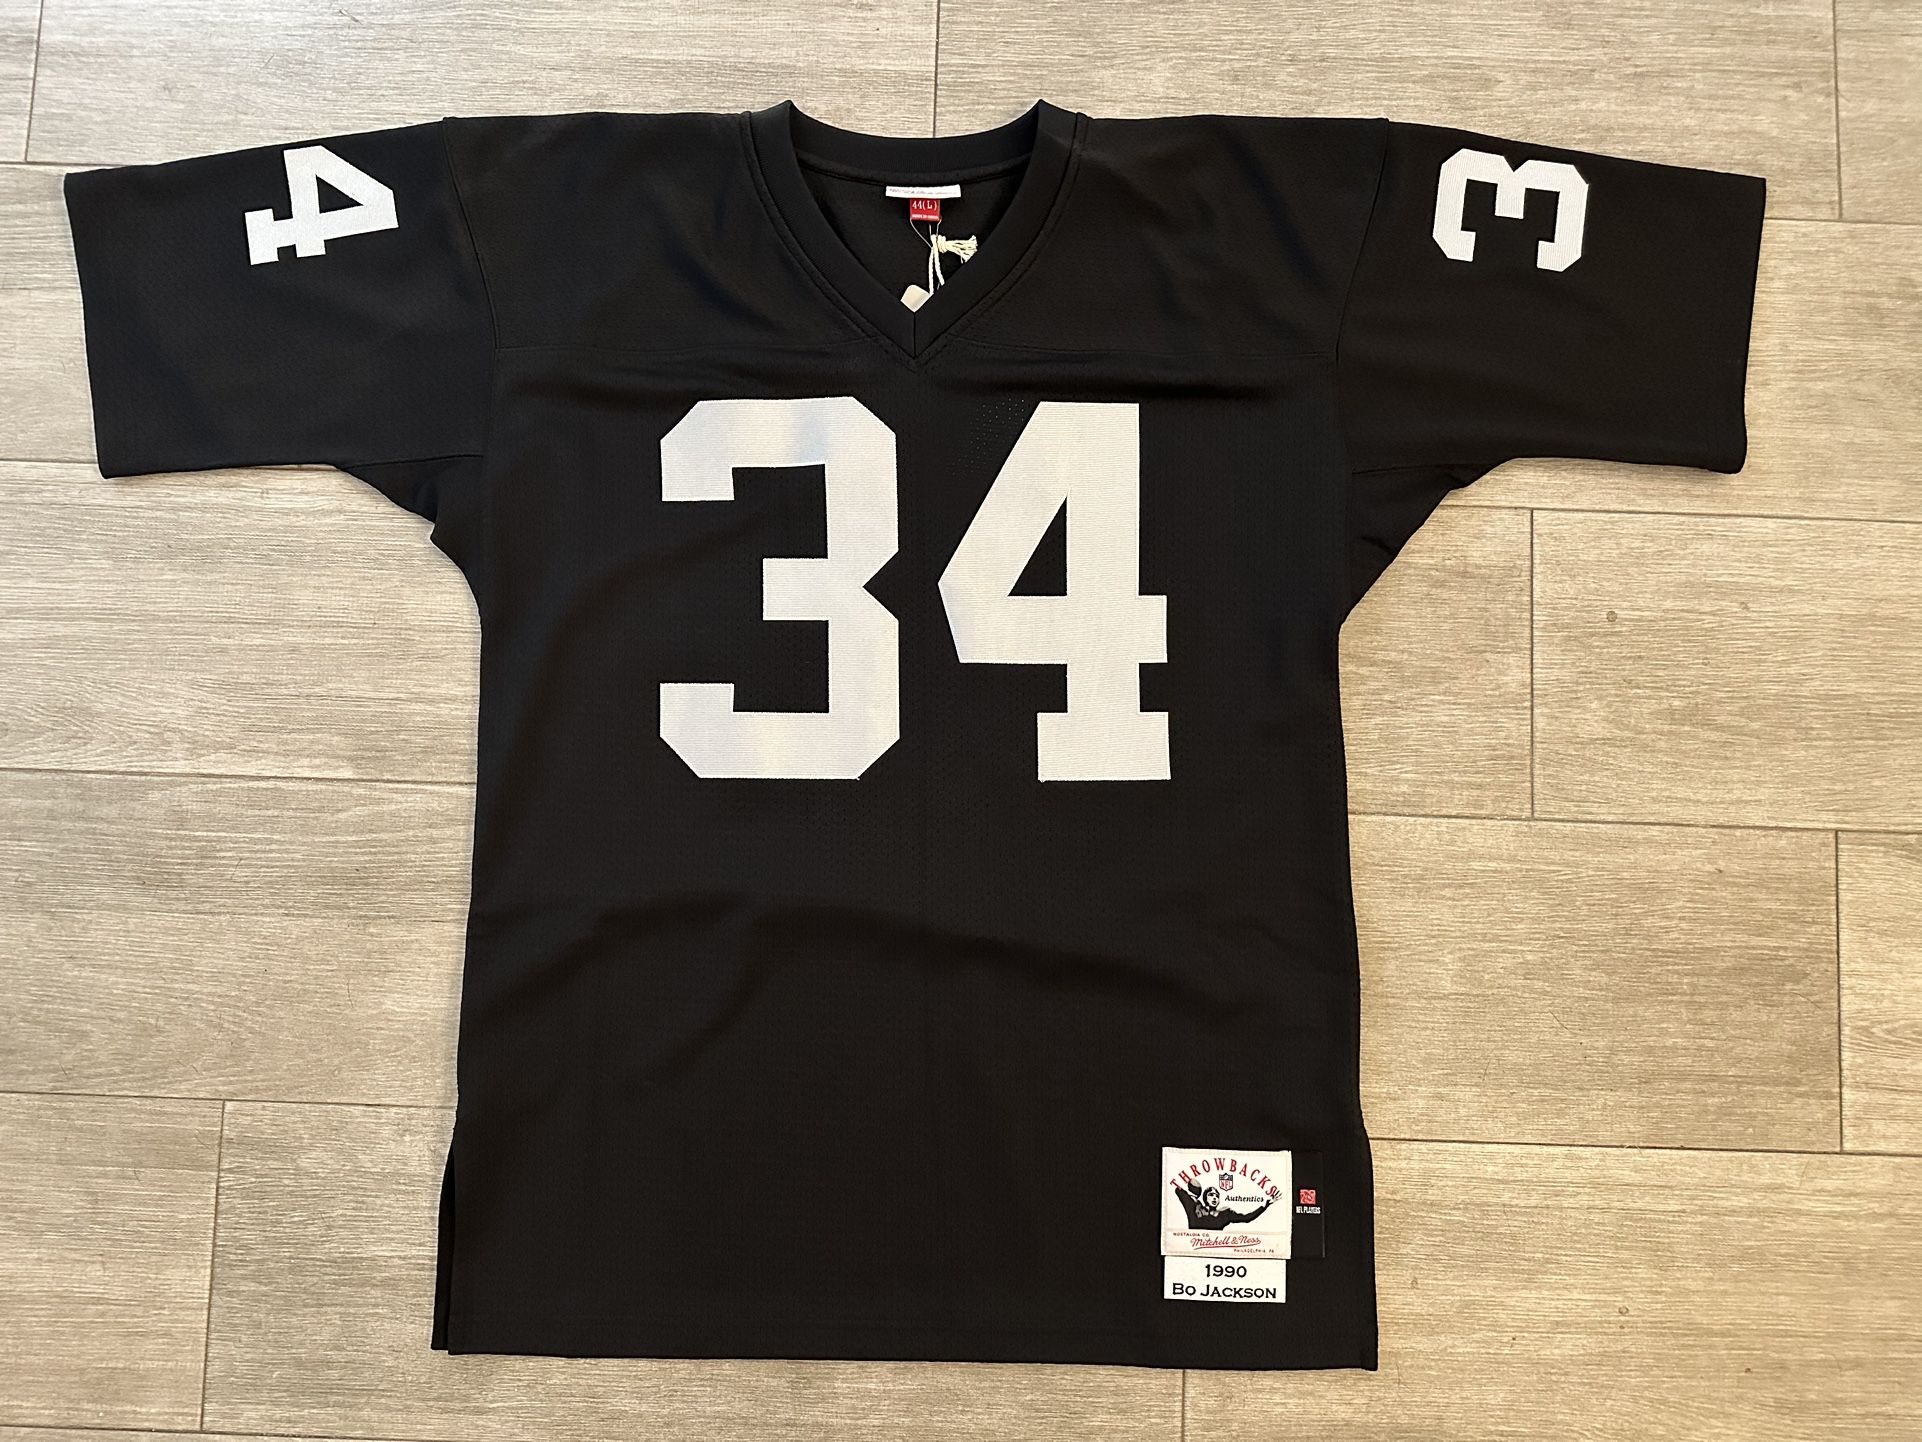 Bo Jackson Mitchell & Ness Los Angeles Raiders 1990 Black Authentic Jersey Size Large 42 New w/ Tags